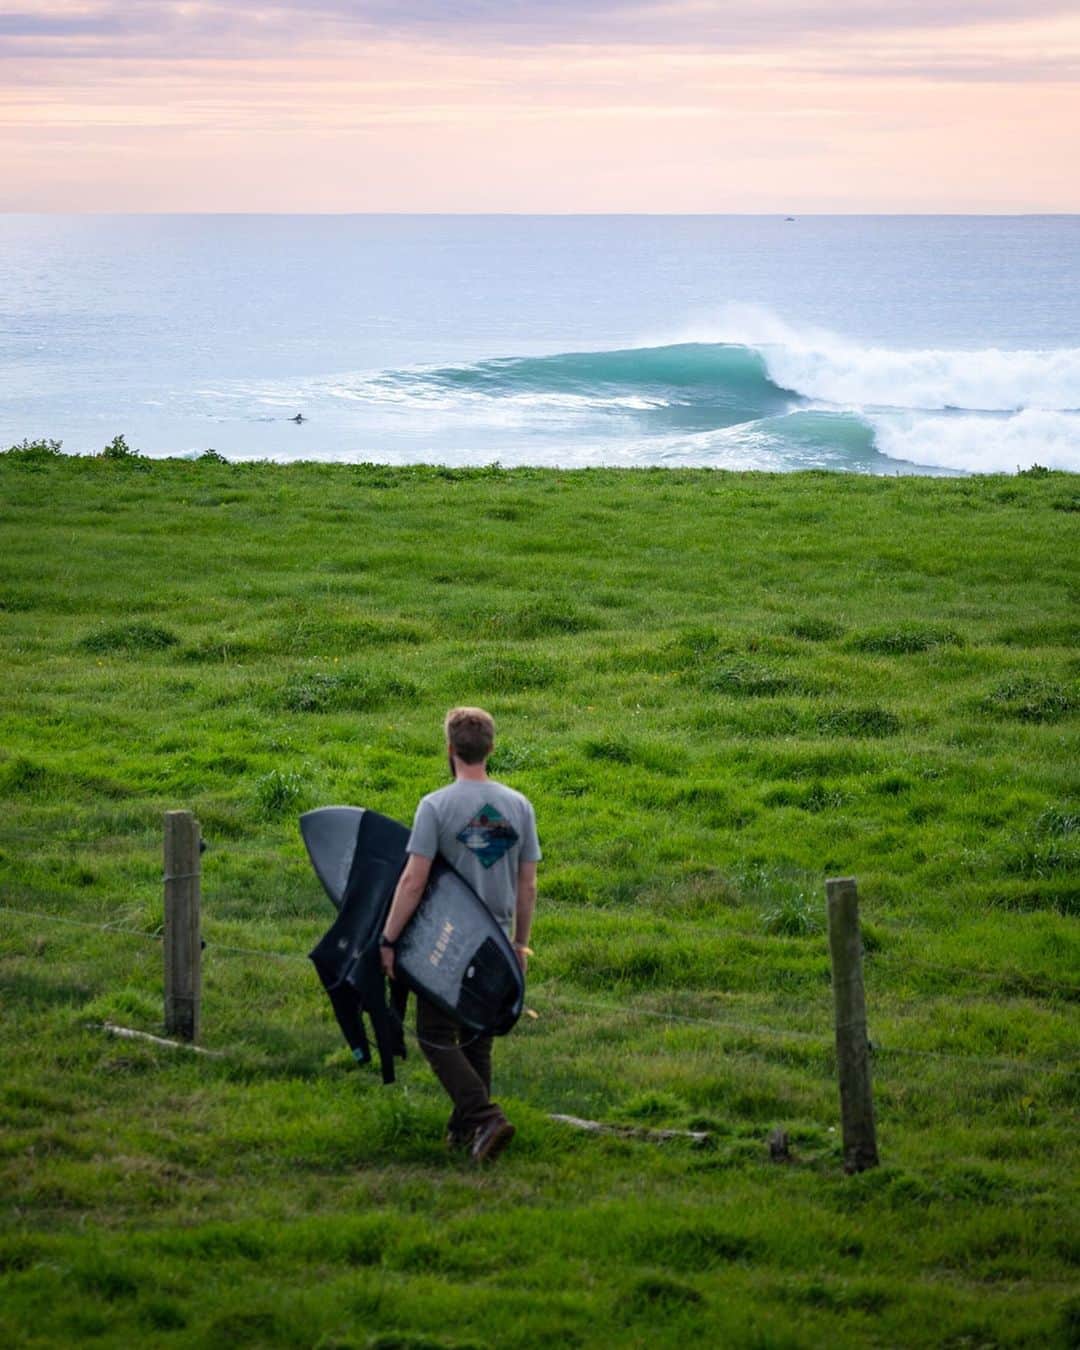 Travis Burkeのインスタグラム：「Carefully climbing over electric fences, roaming through farmlands, getting strange looks from the locals (cows), and occasionally stumbling upon perfect surf with only one other person out!  I’ve been loving the slower pace of life here. There are currently only 45 active cases of Covid-19 in the entire country of New Zealand, so things are feeling a lot more normal again. Laysea and I have made some incredible friends and this place is really starting to feel like home. Here are a few photos and videos for a glimpse of what we’ve been up to in the last few days.  #vanlife #newzealand #surf #surfculture」